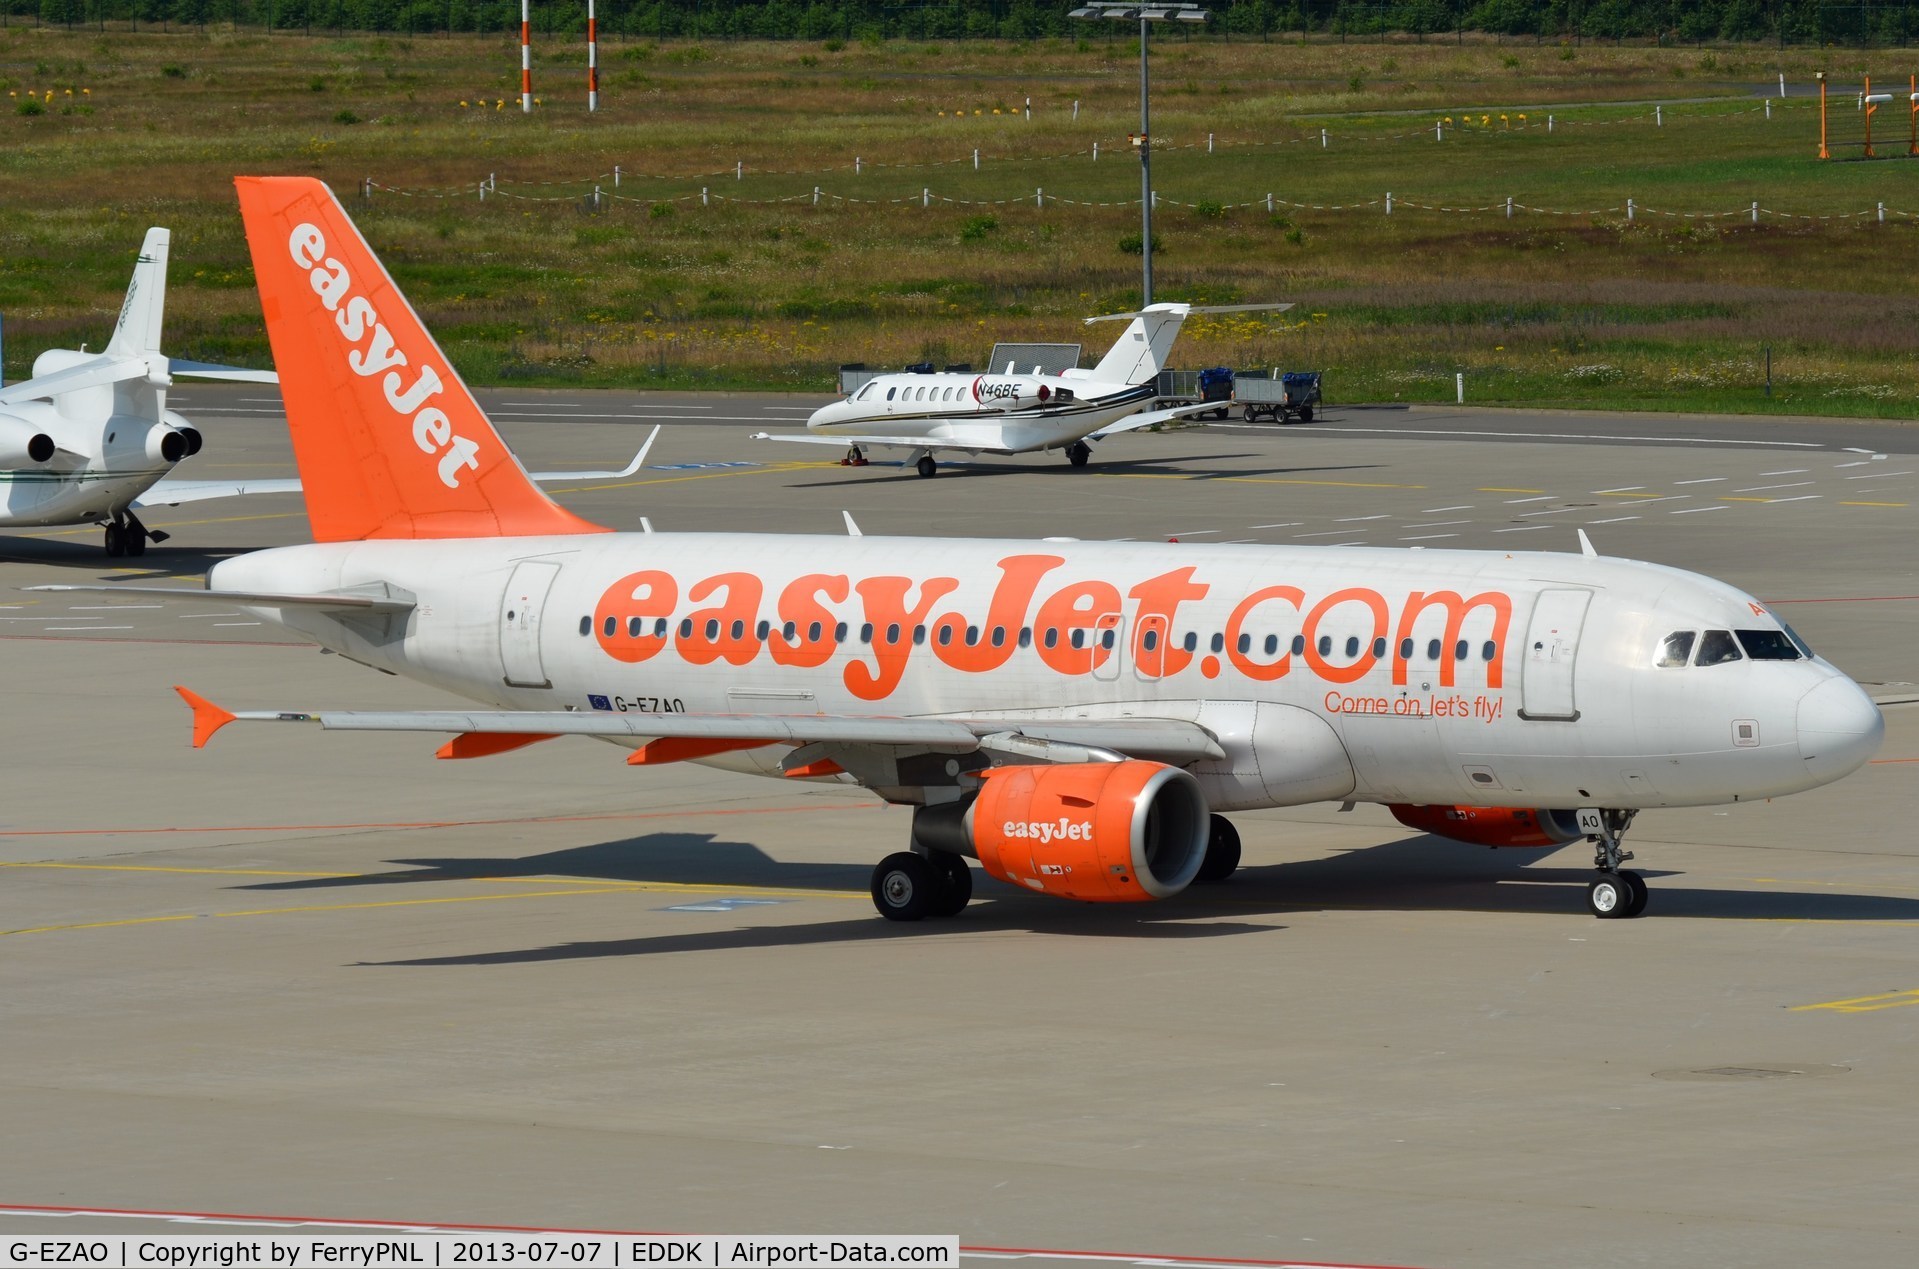 G-EZAO, 2006 Airbus A319-111 C/N 2769, Easyjet A319 taxying out